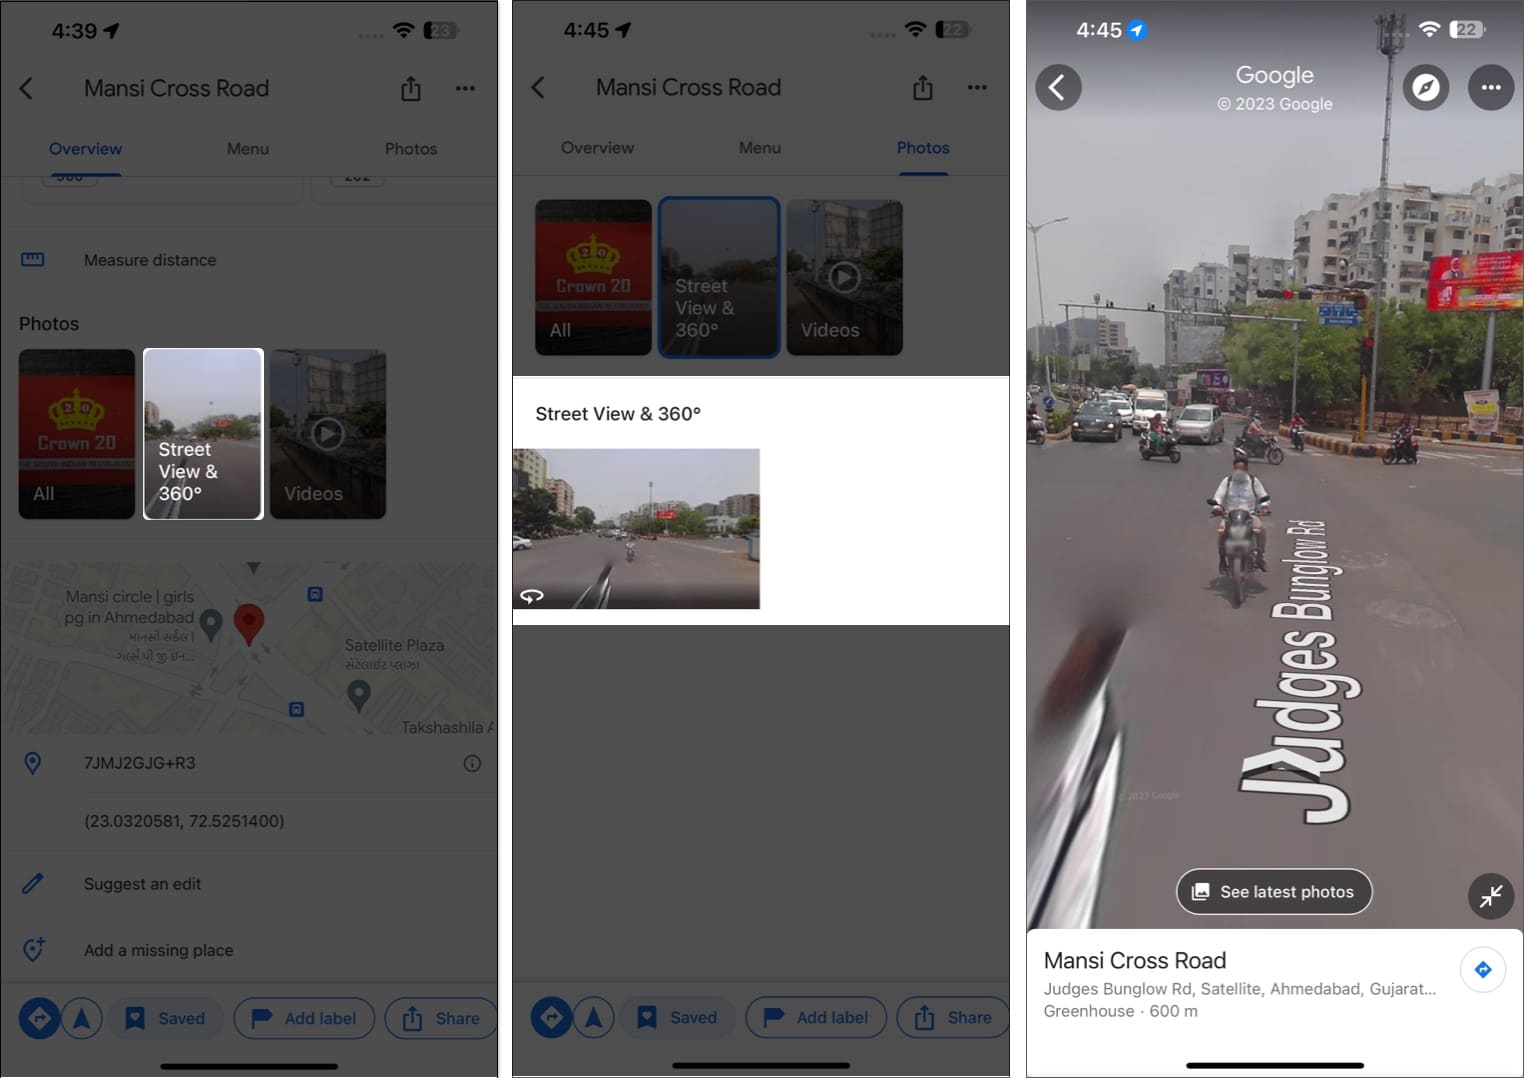 Tap street view and 360, select the street view option, in the google maps